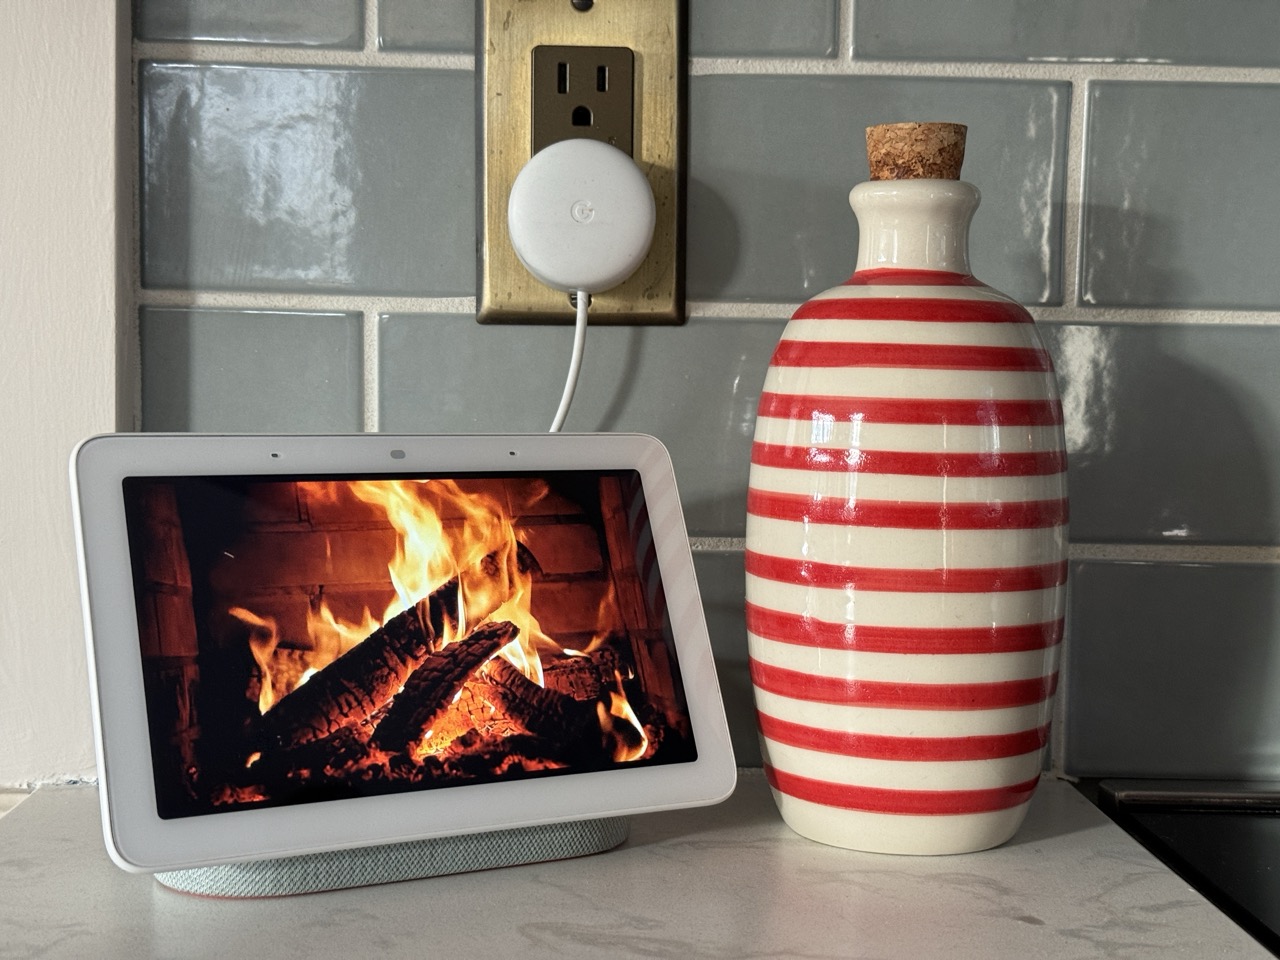 Google Home Hub showing a fireplace on it, showing how to hide smart tech